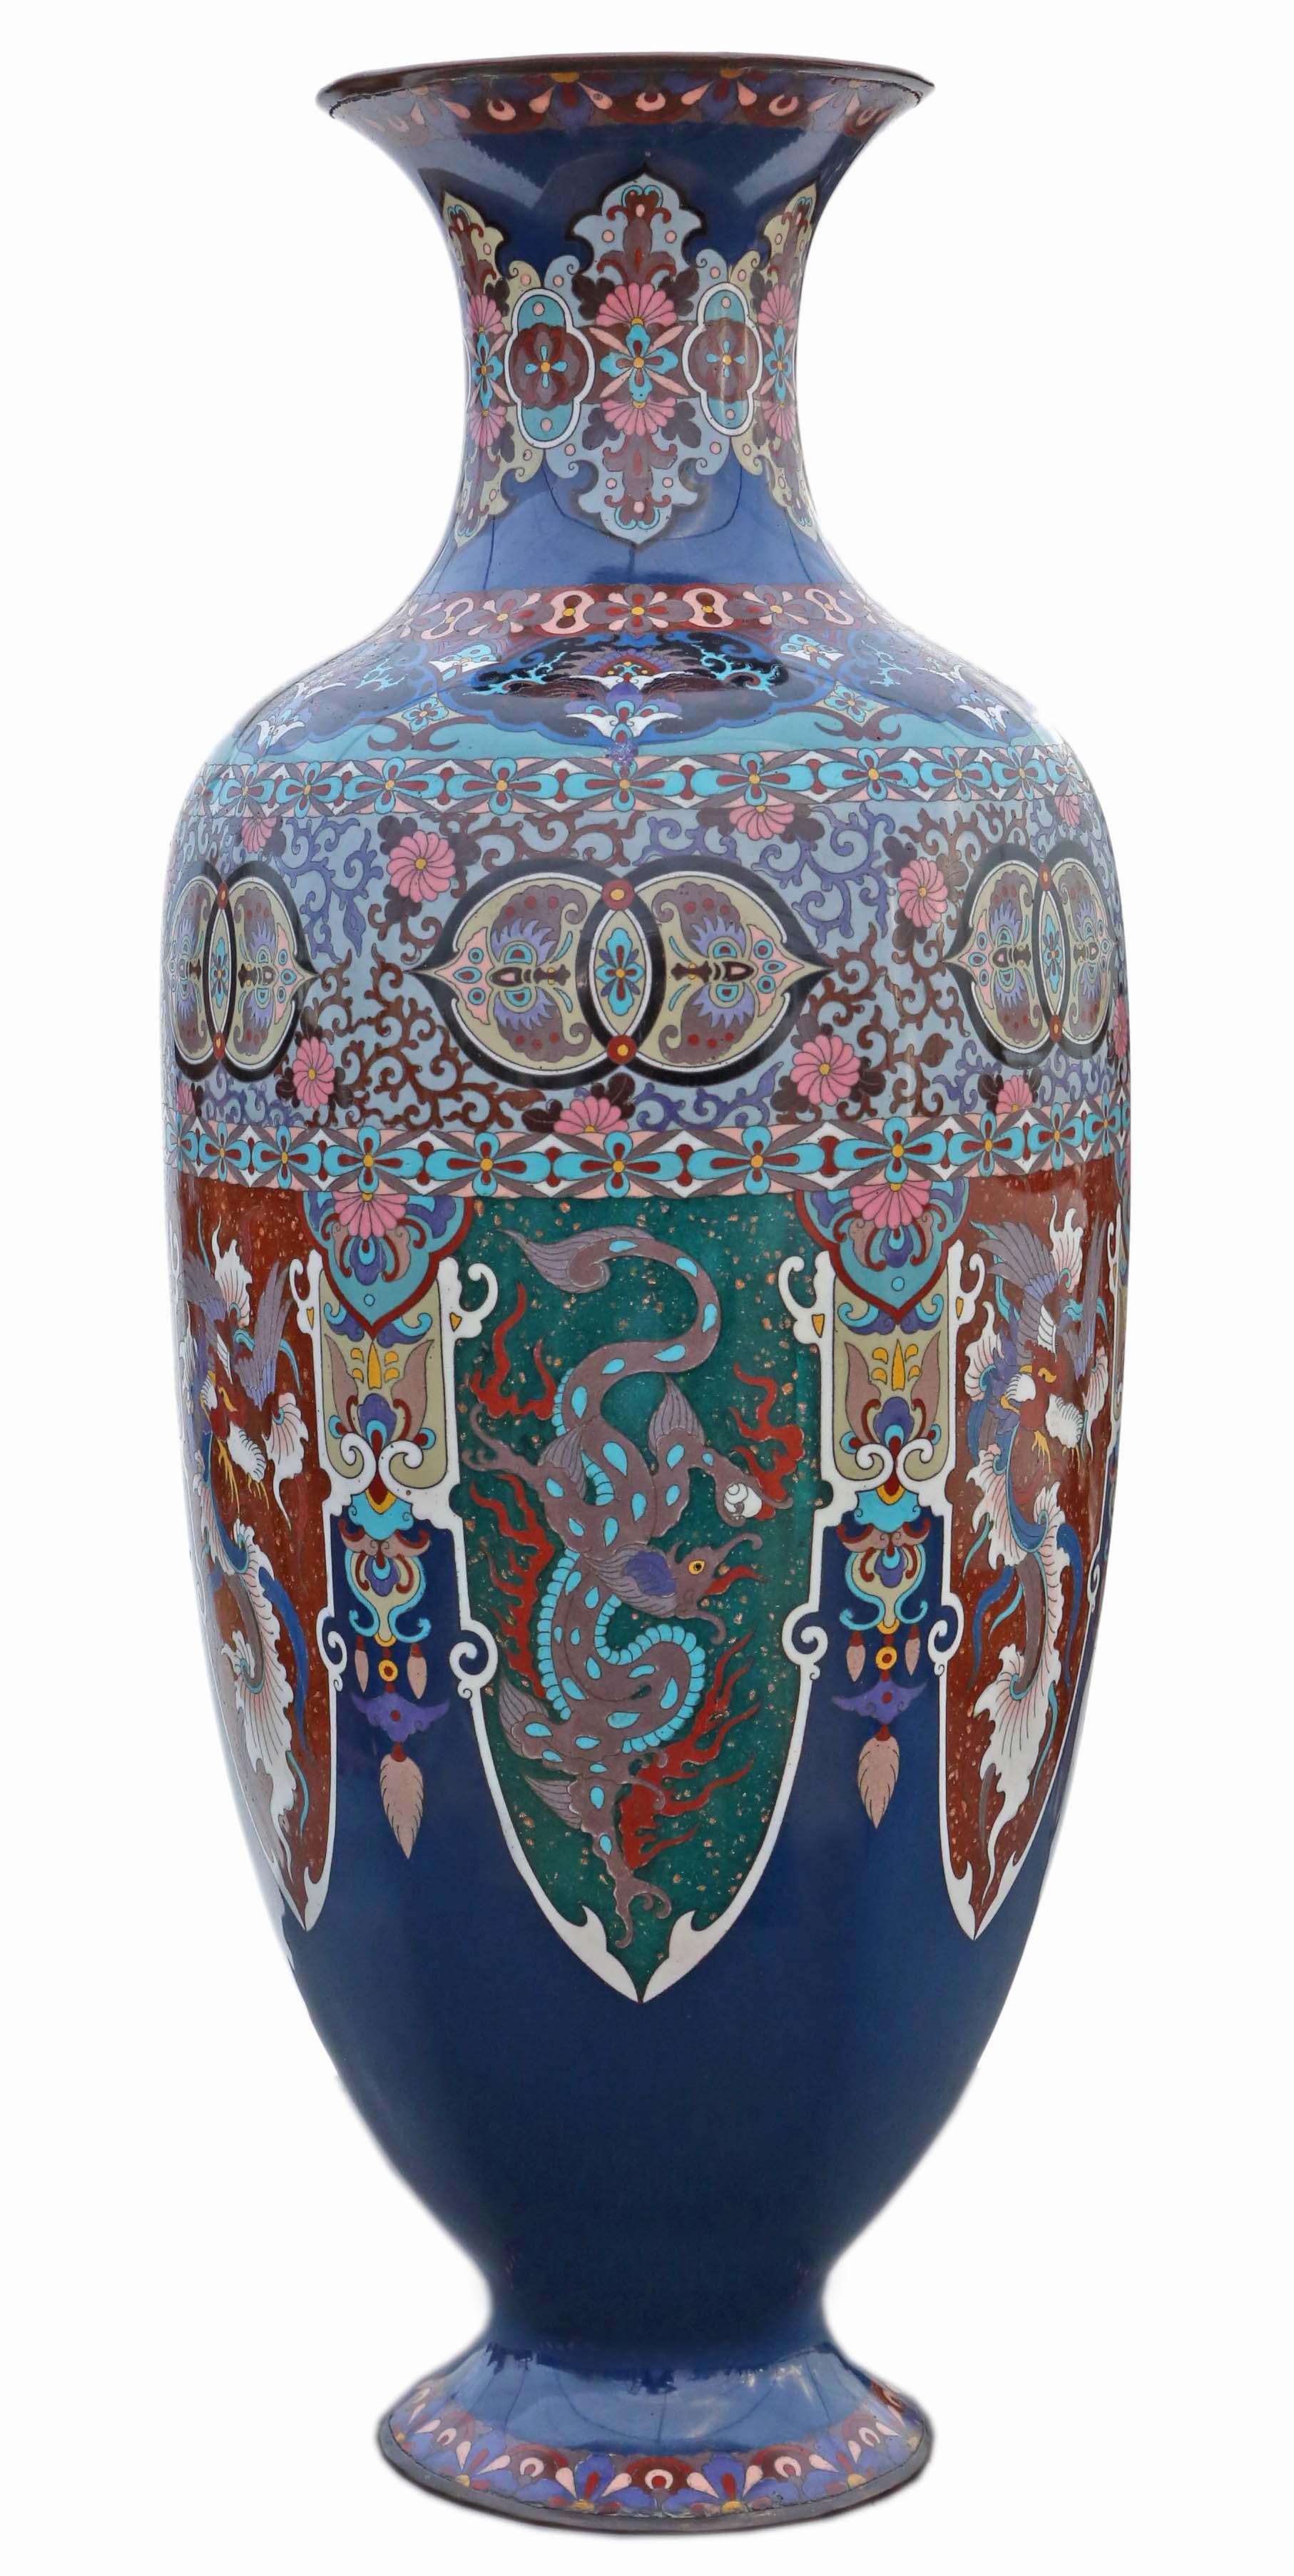 Antique 19th Century Oriental Japanese Cloisonné Vase - Impressive Large Piece!

This stunning cloisonné vase from the 19th century boasts remarkable craftsmanship and intricate detailing. Crafted from brass/bronze and adorned with enamel, gilt, and